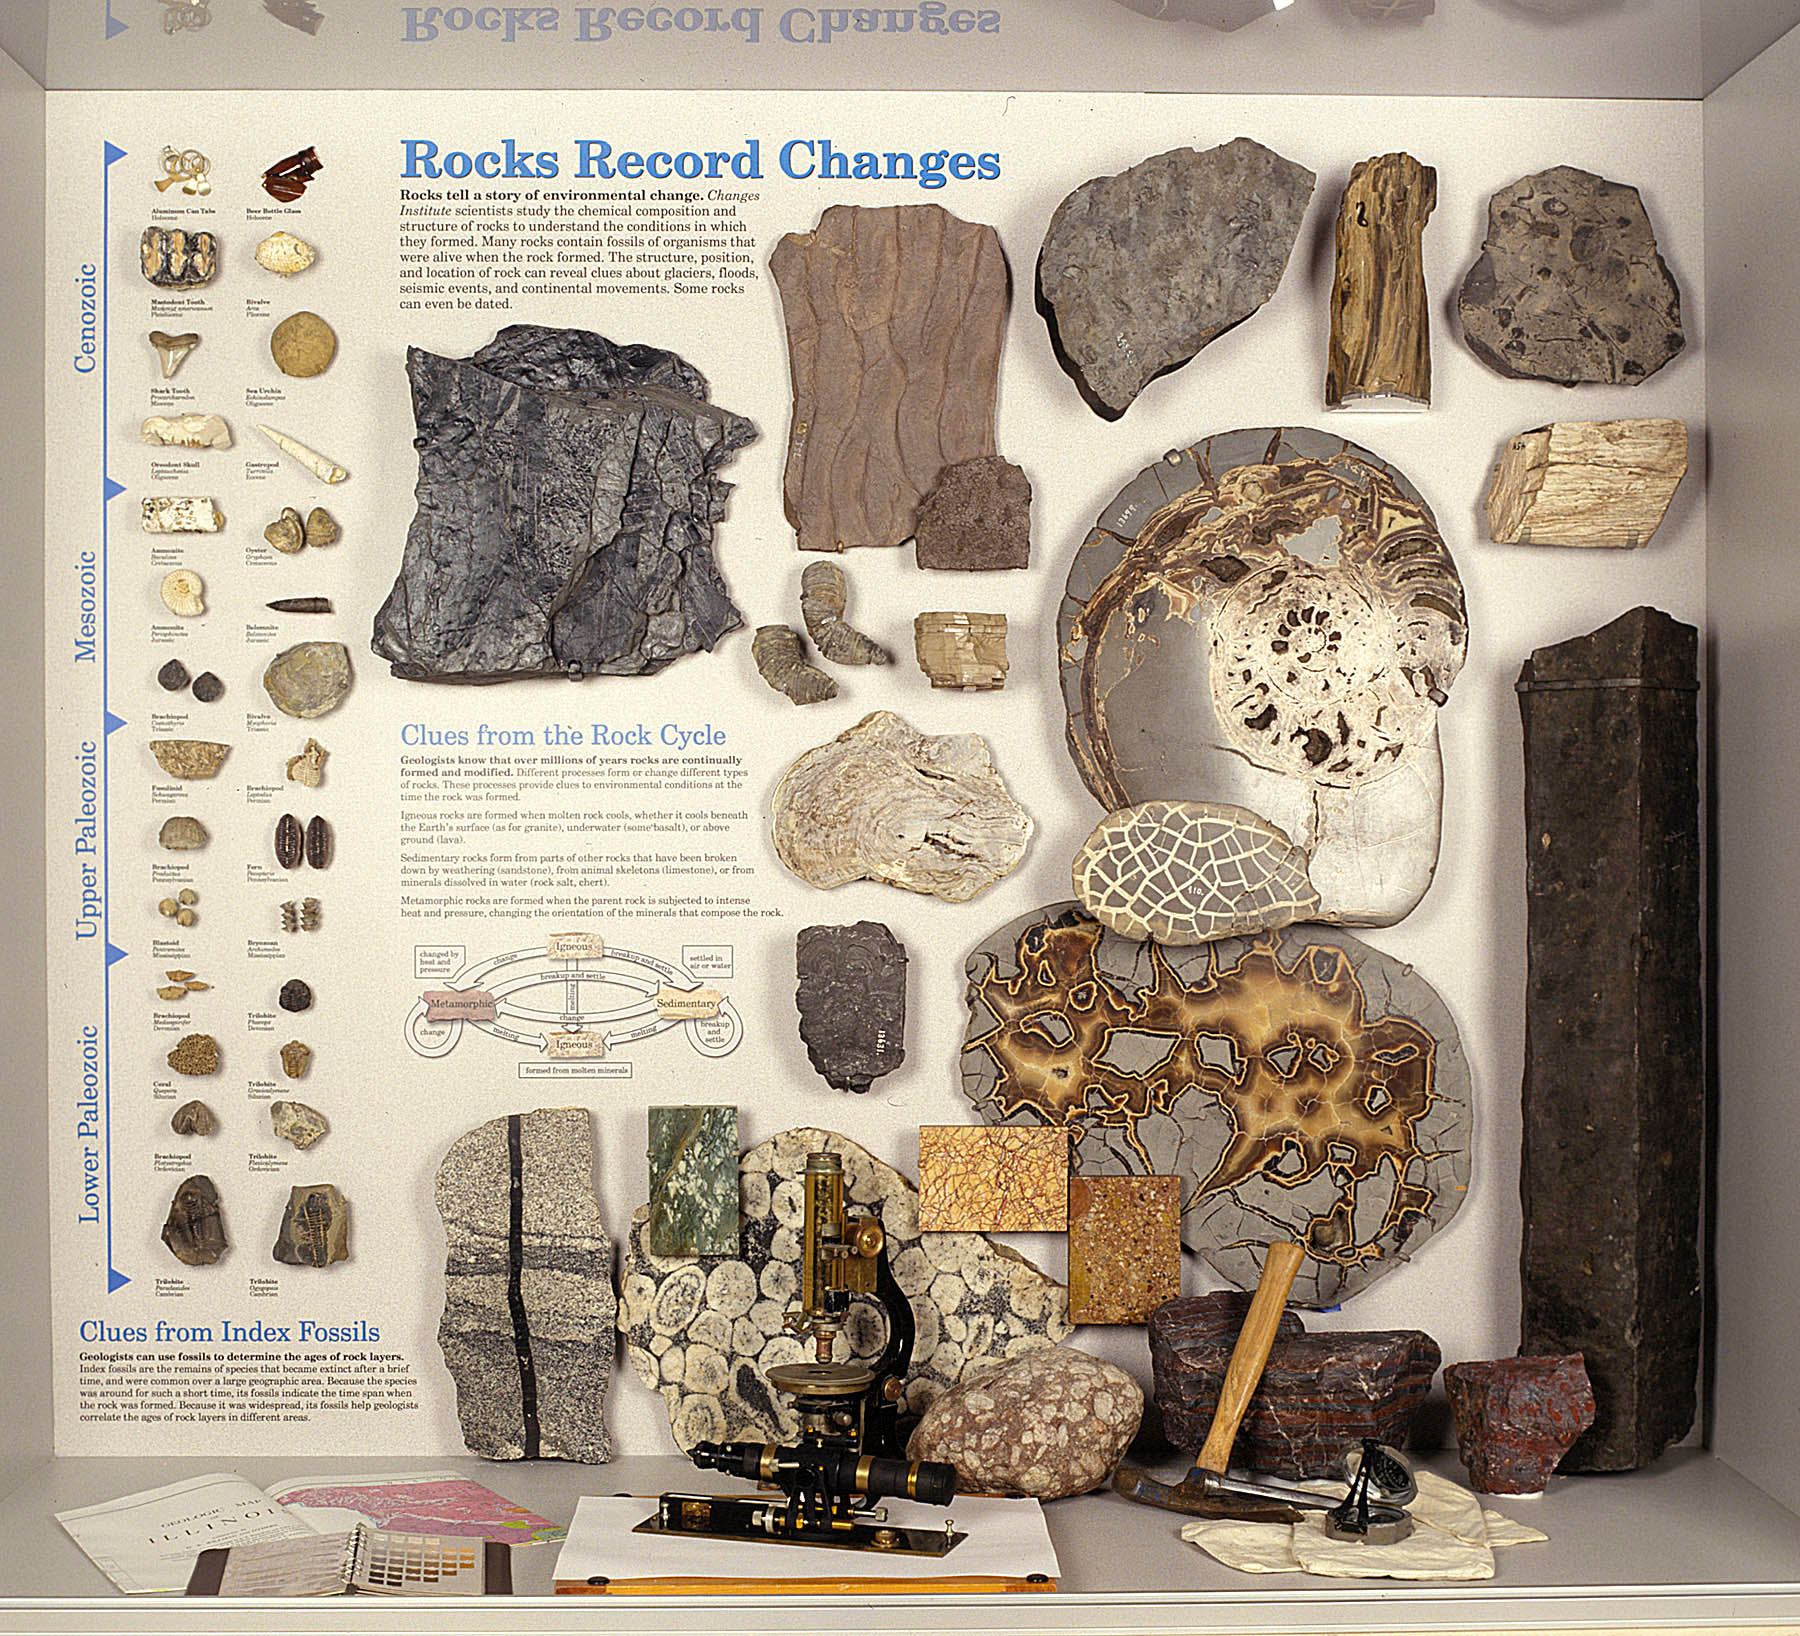 exhibit panel on the geological record